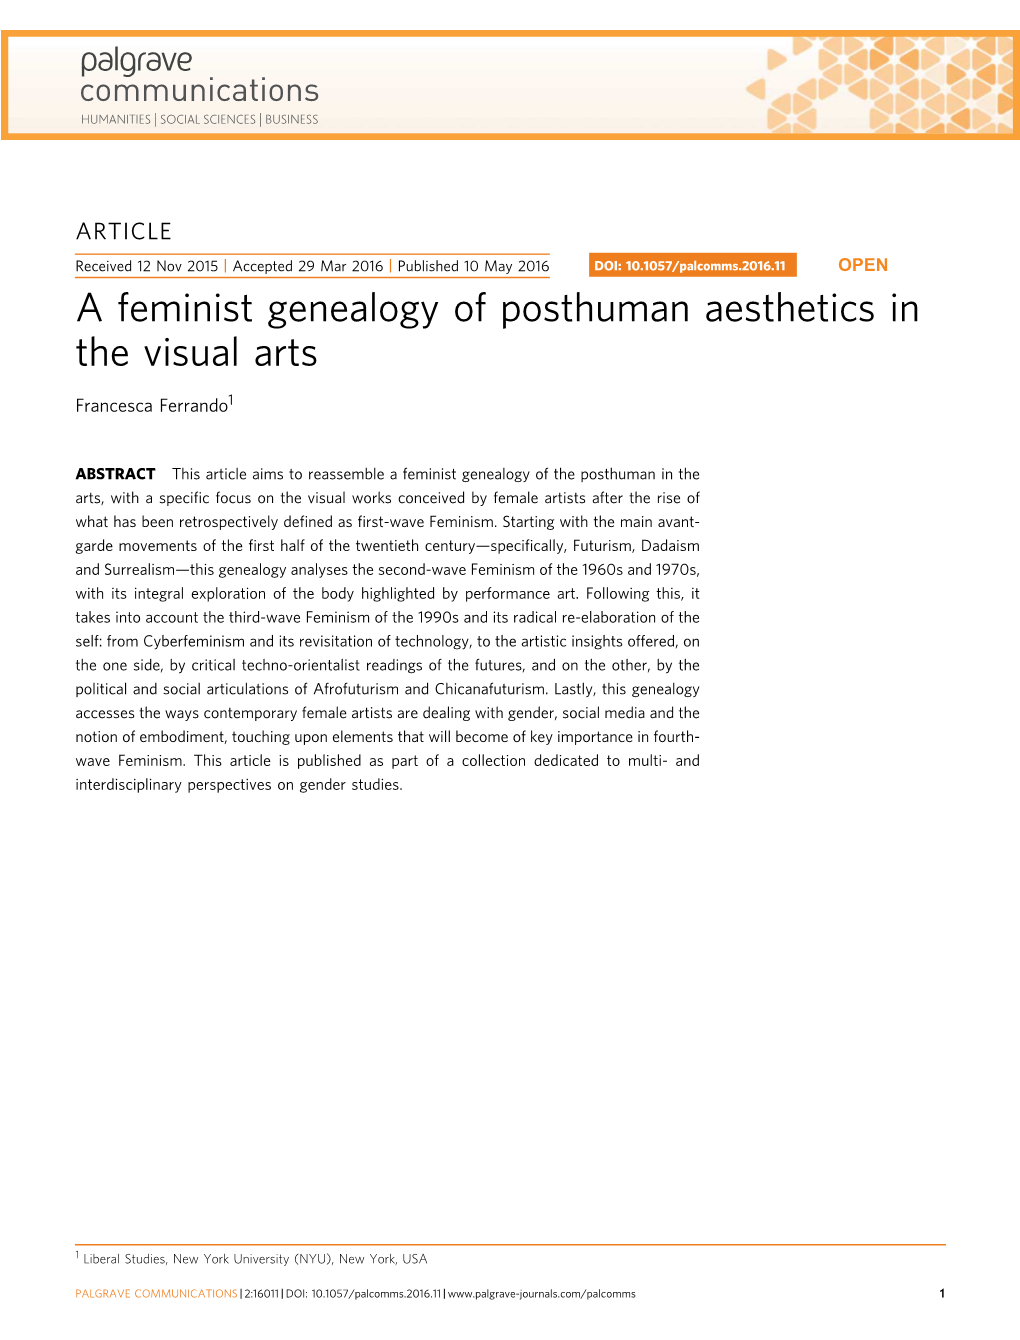 A Feminist Genealogy of Posthuman Aesthetics in the Visual Arts